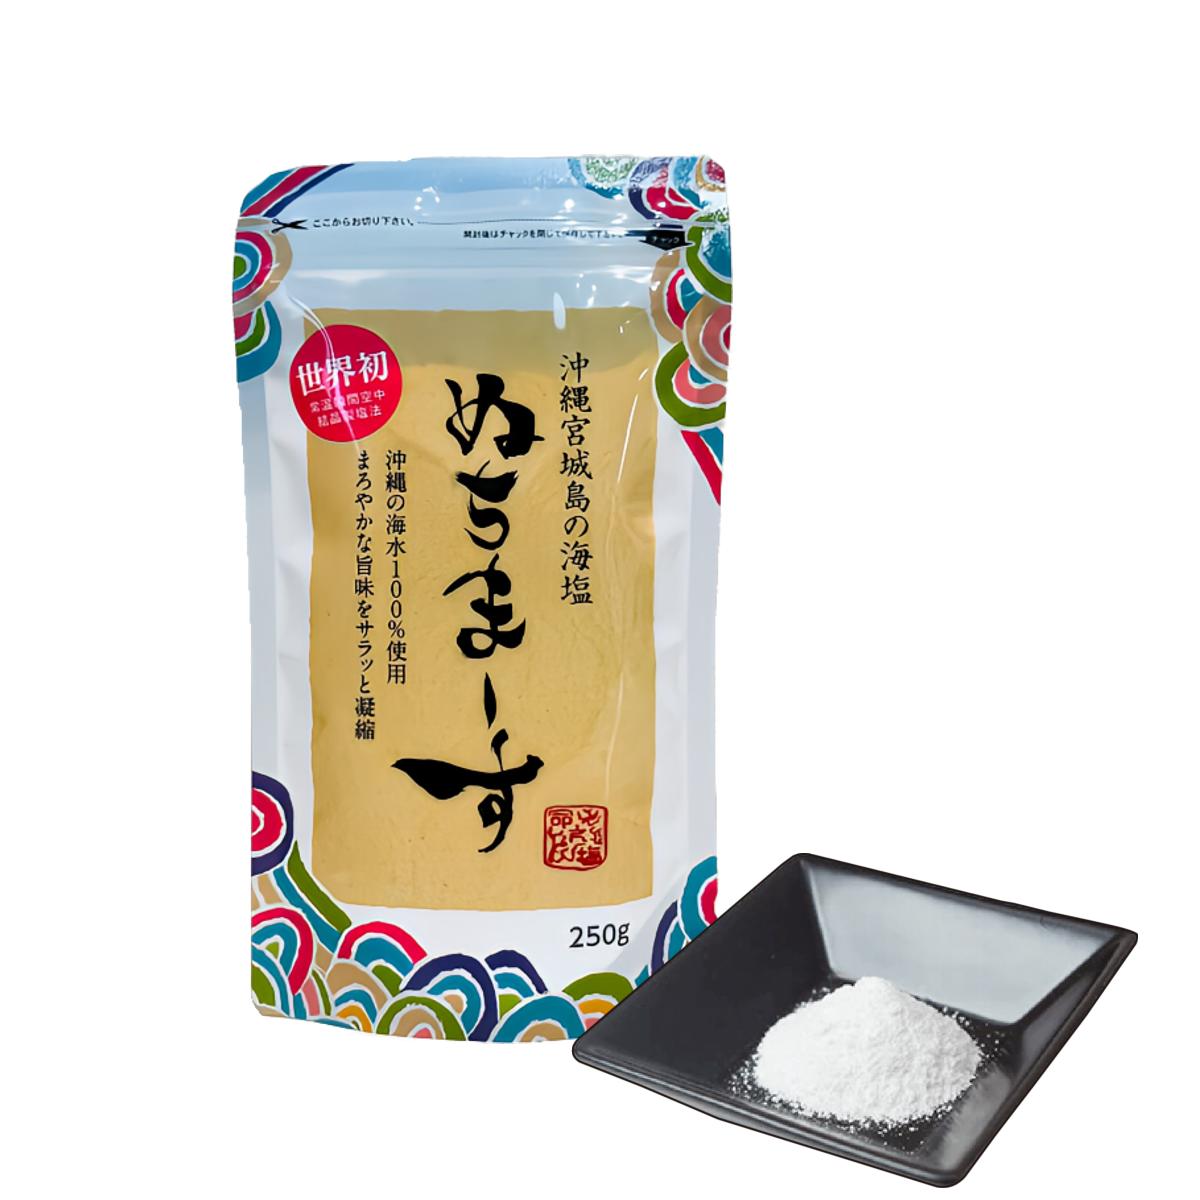 <strong>ぬちまーす</strong> <strong>250g</strong> 塩 ミネラル豊富 メール便発送 送料無料 ぬちマース